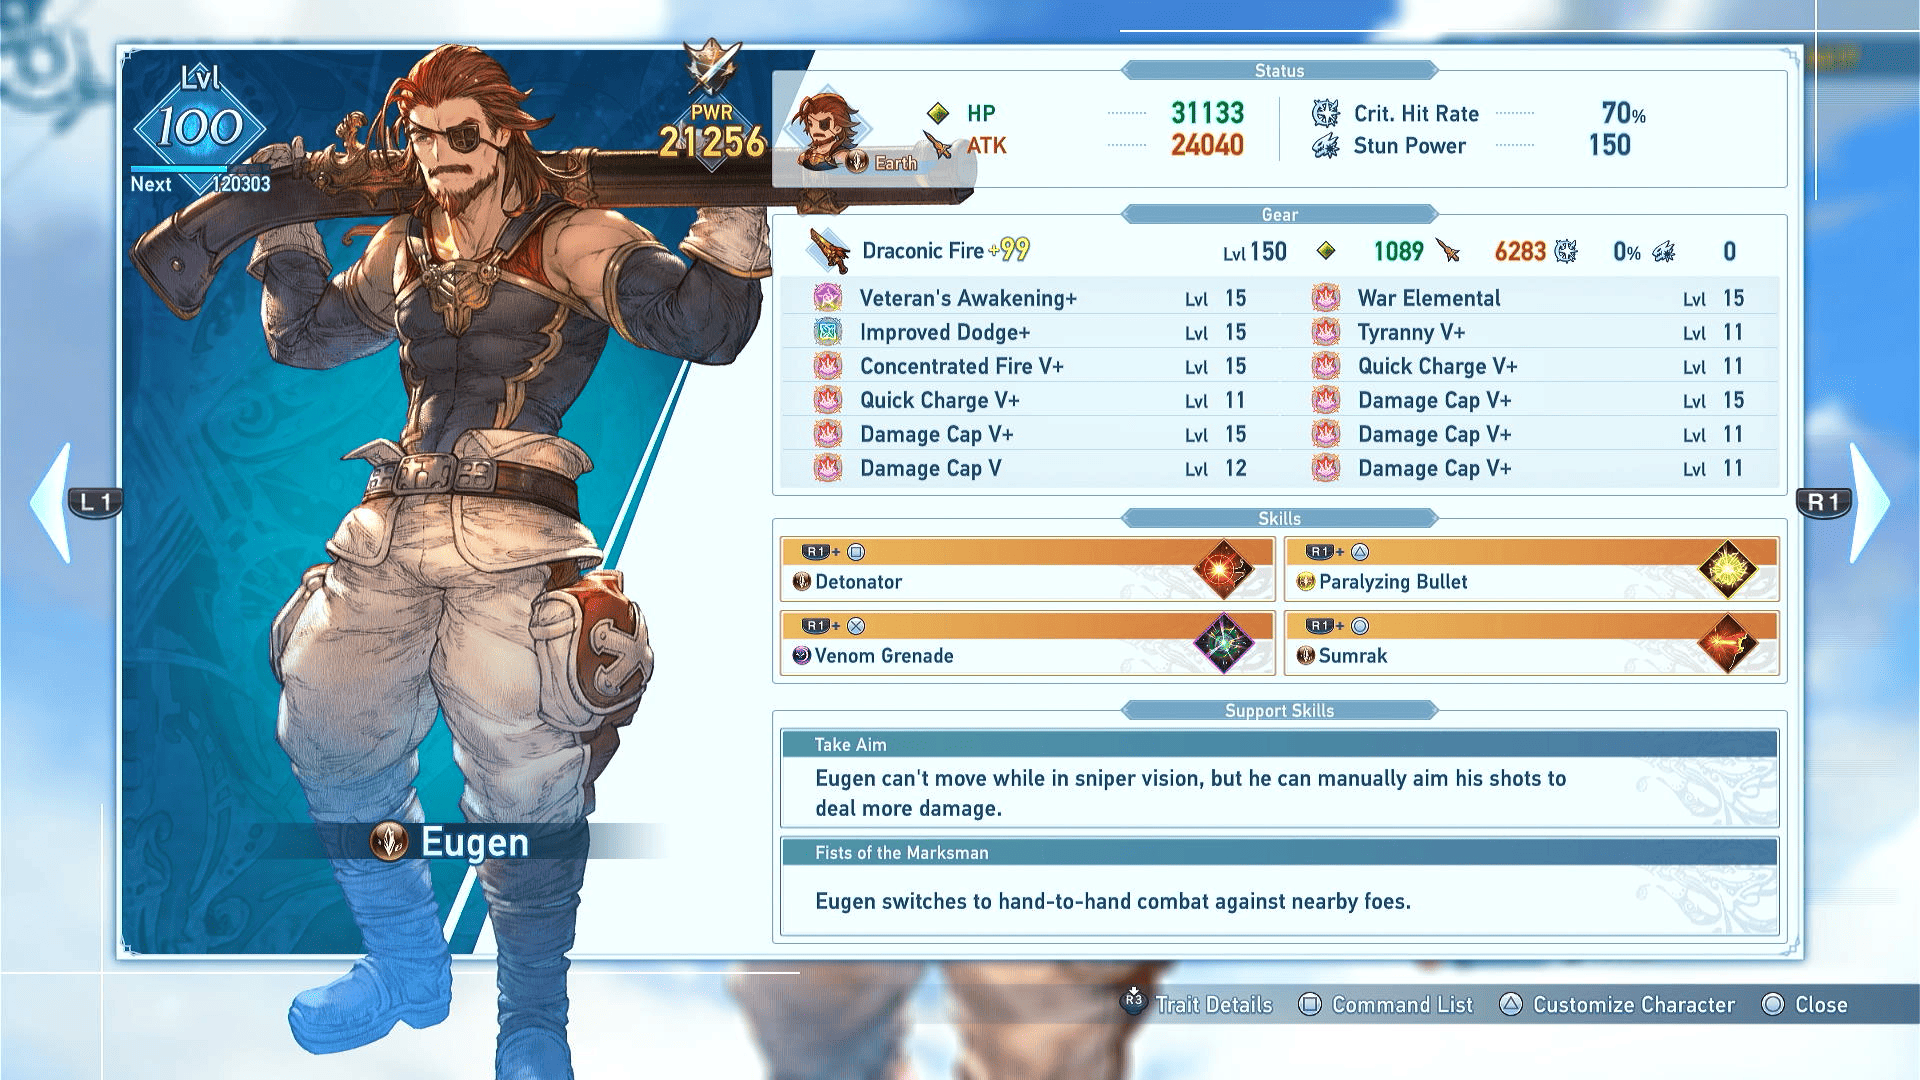 Granblue Fantasy Relink Eugen best builds: our loadout for eugen as seen in the party meenu